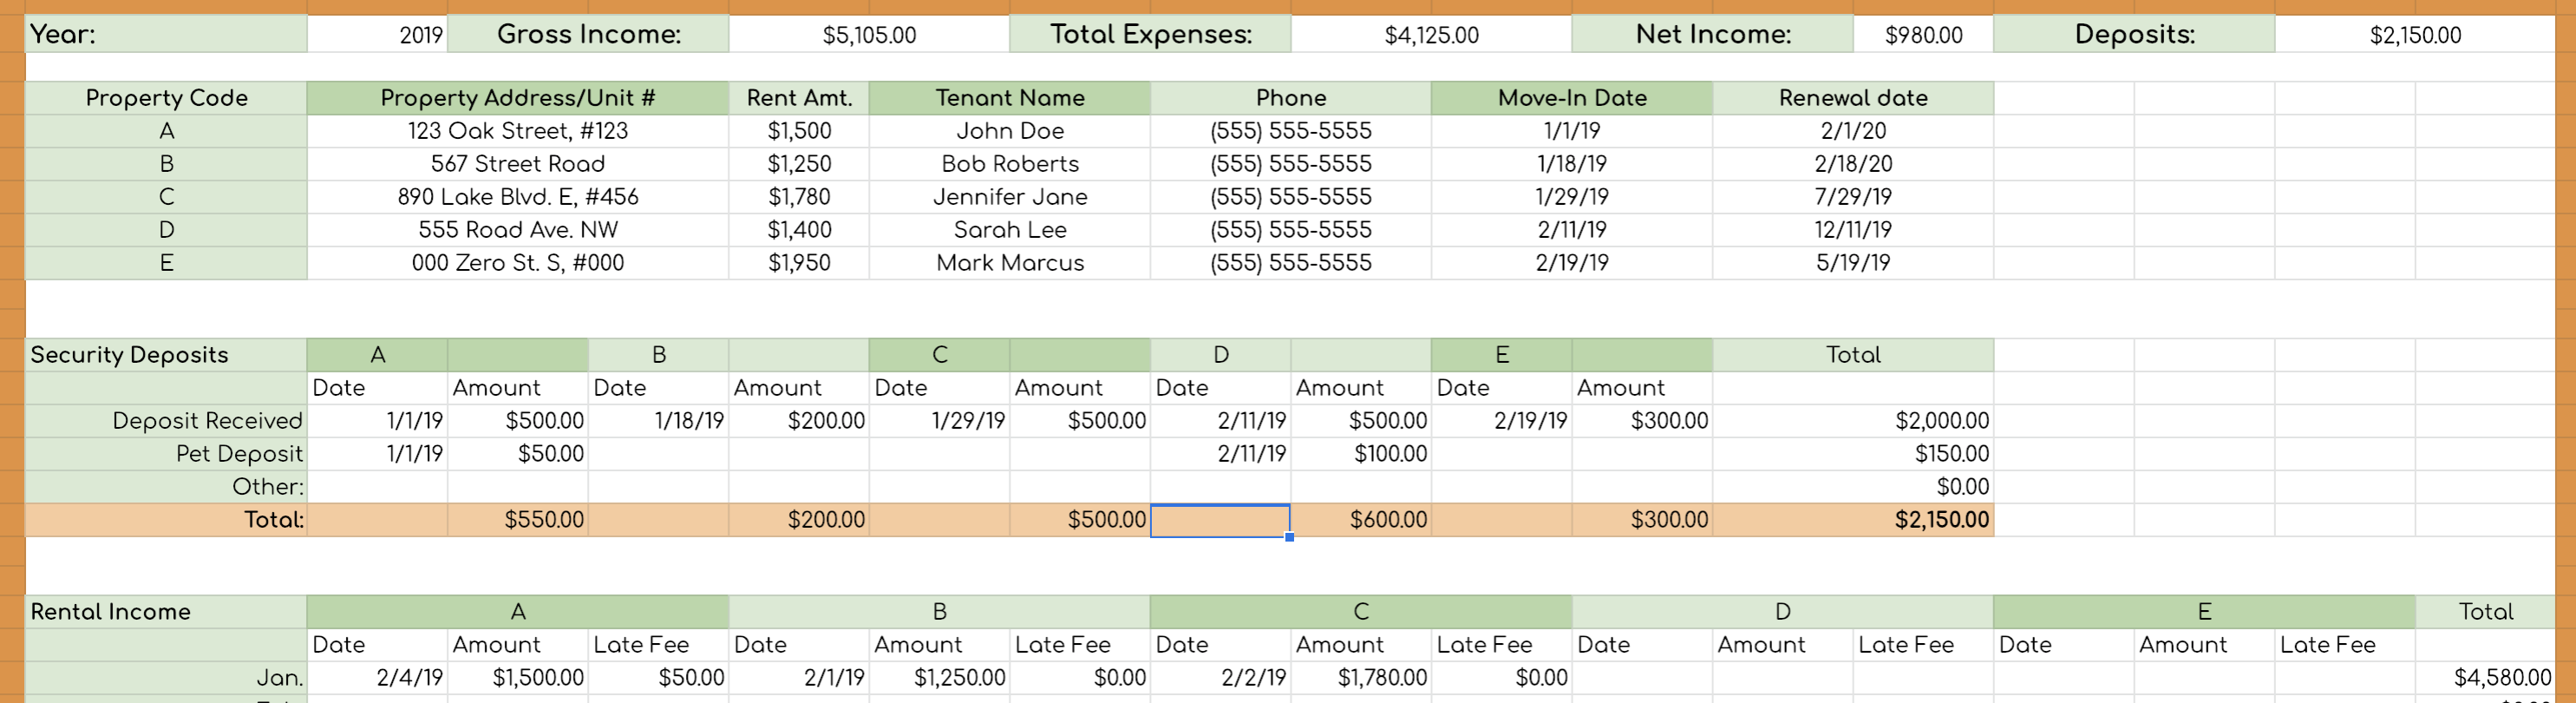 rental-income-and-expense-worksheet-propertymanagement